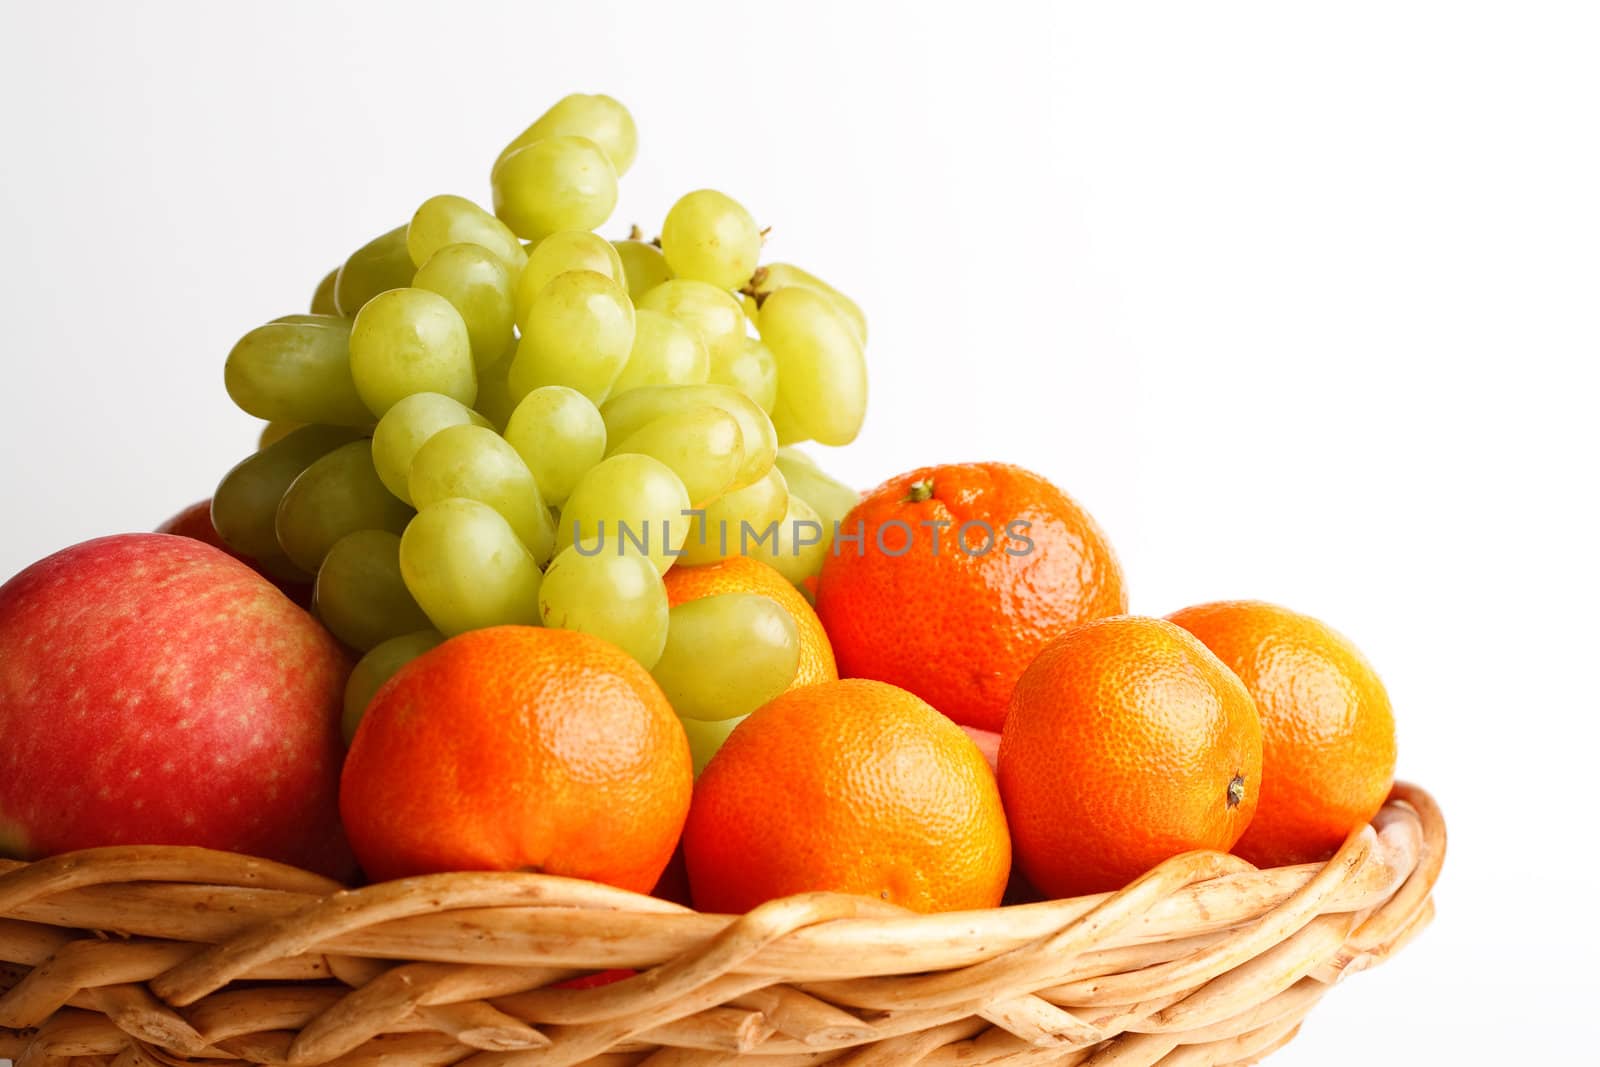 A basket of assorted fruits